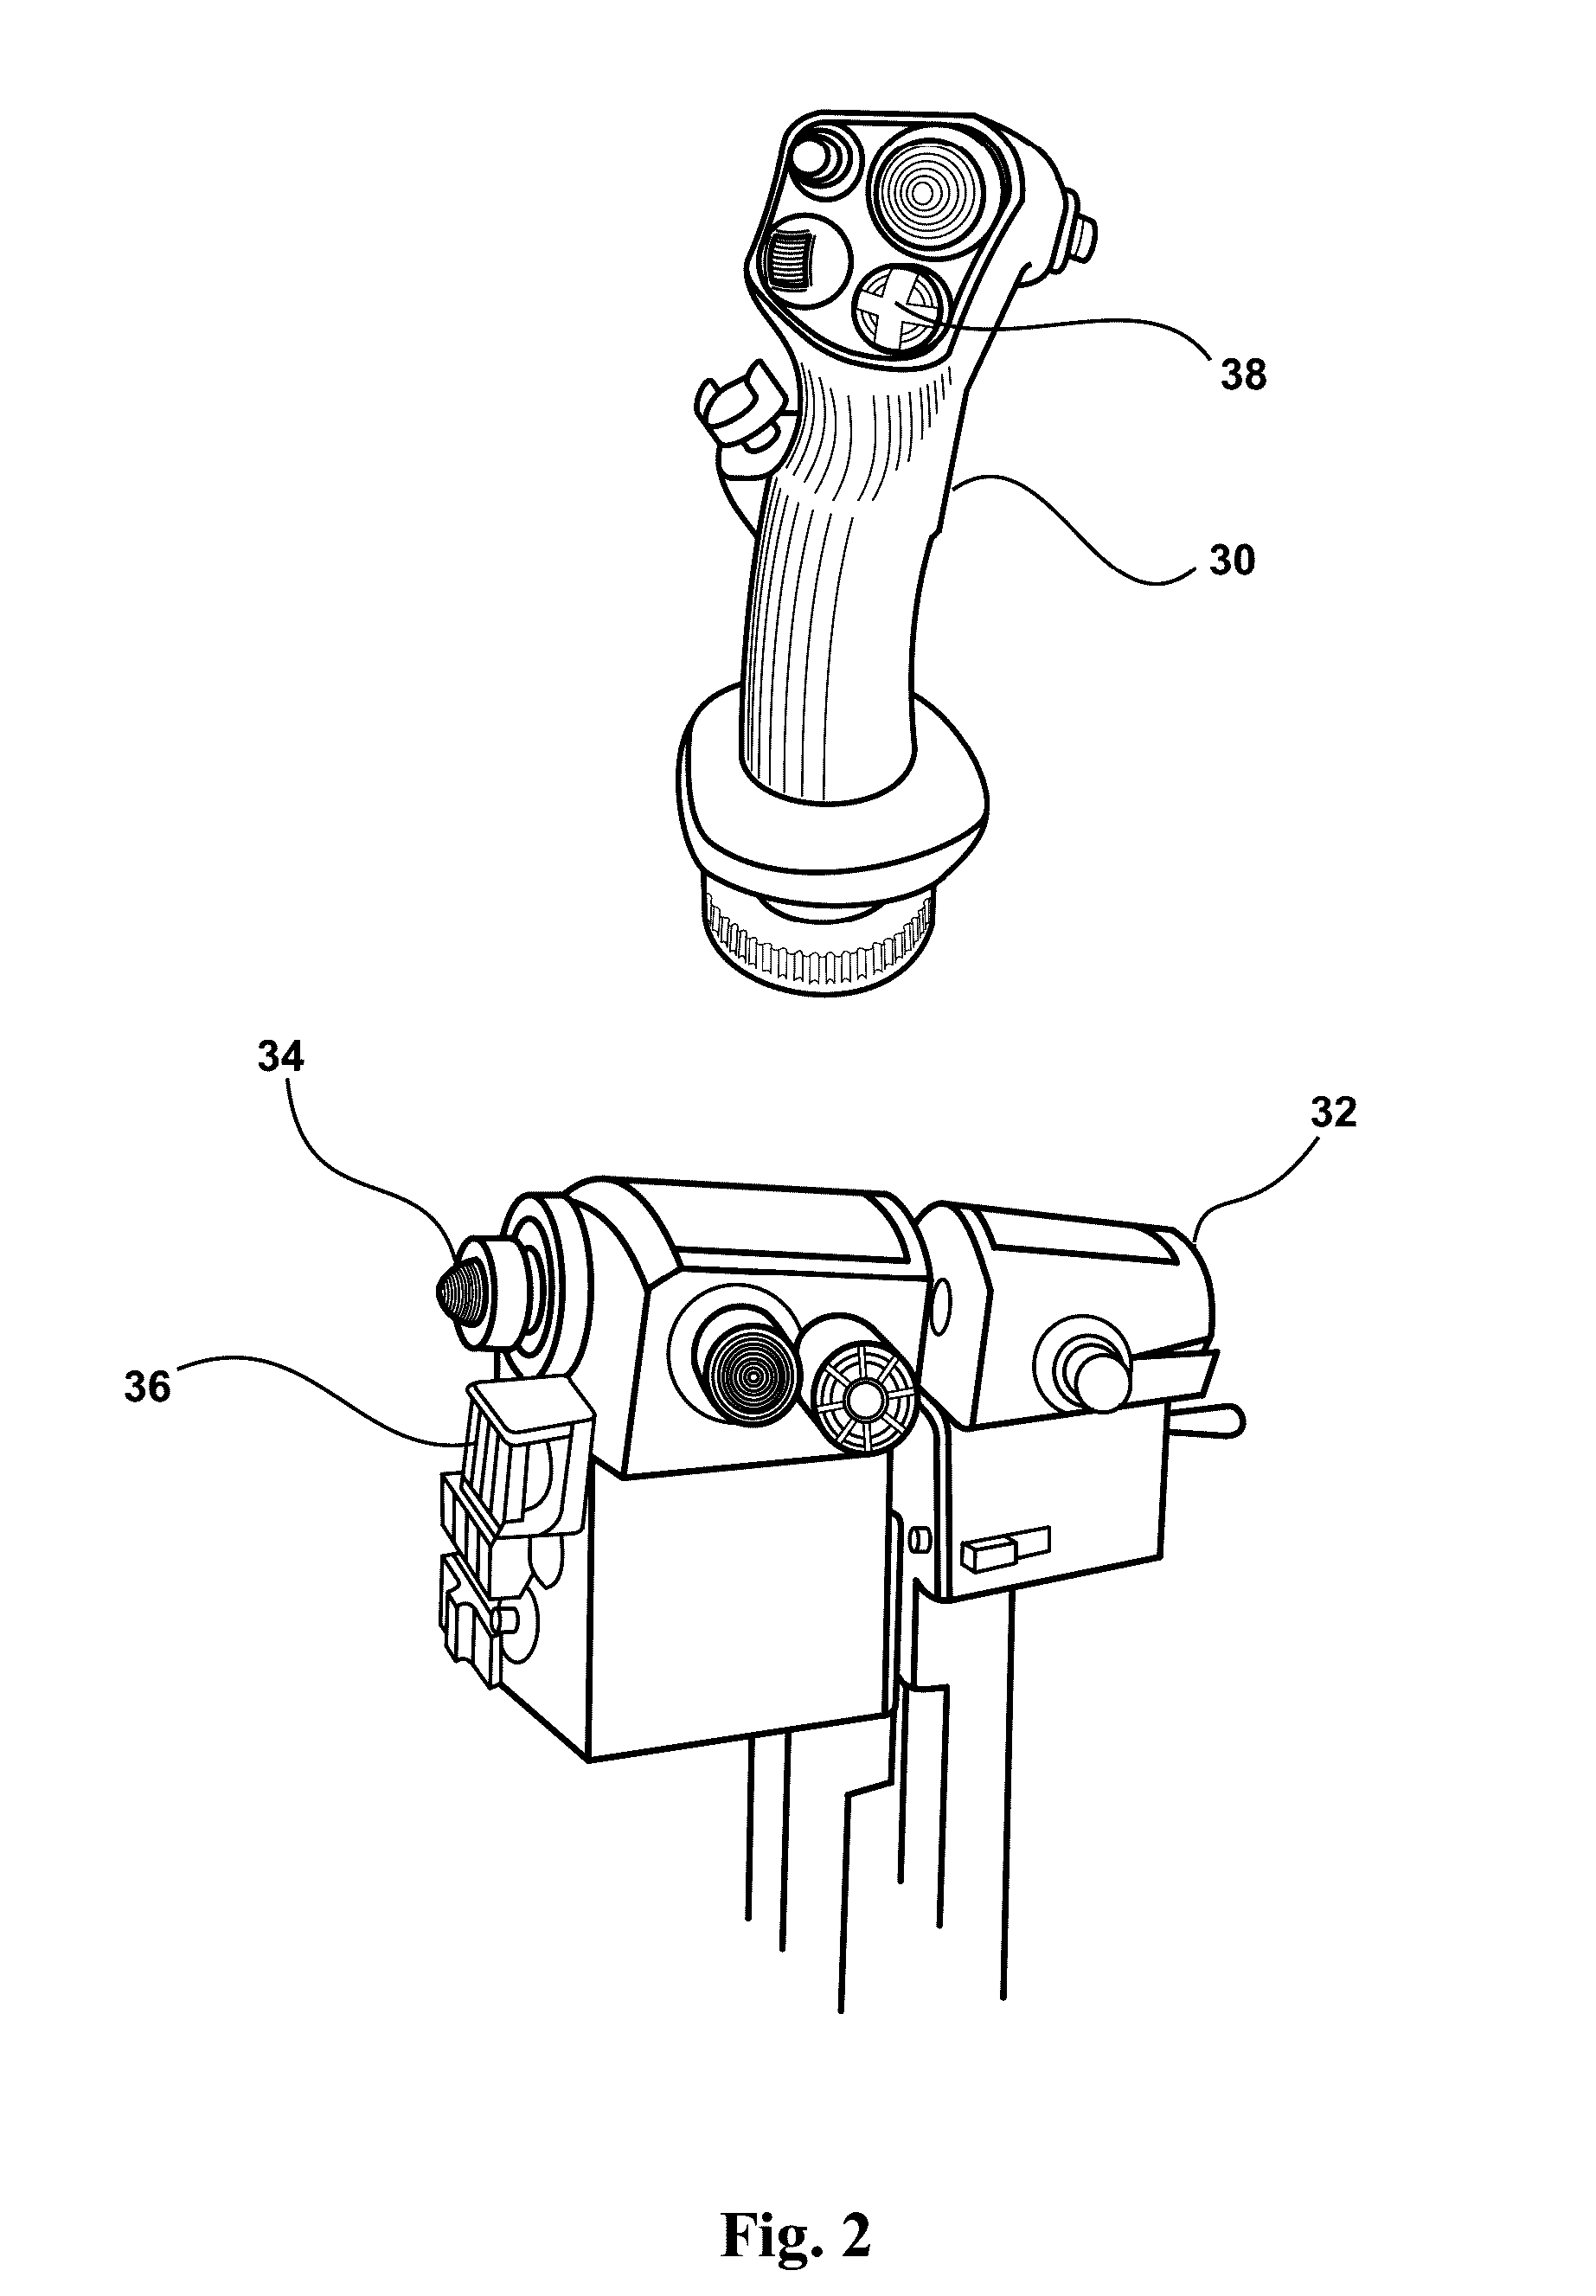 Method and apparatus for operator supervision and direction of highly autonomous vehicles